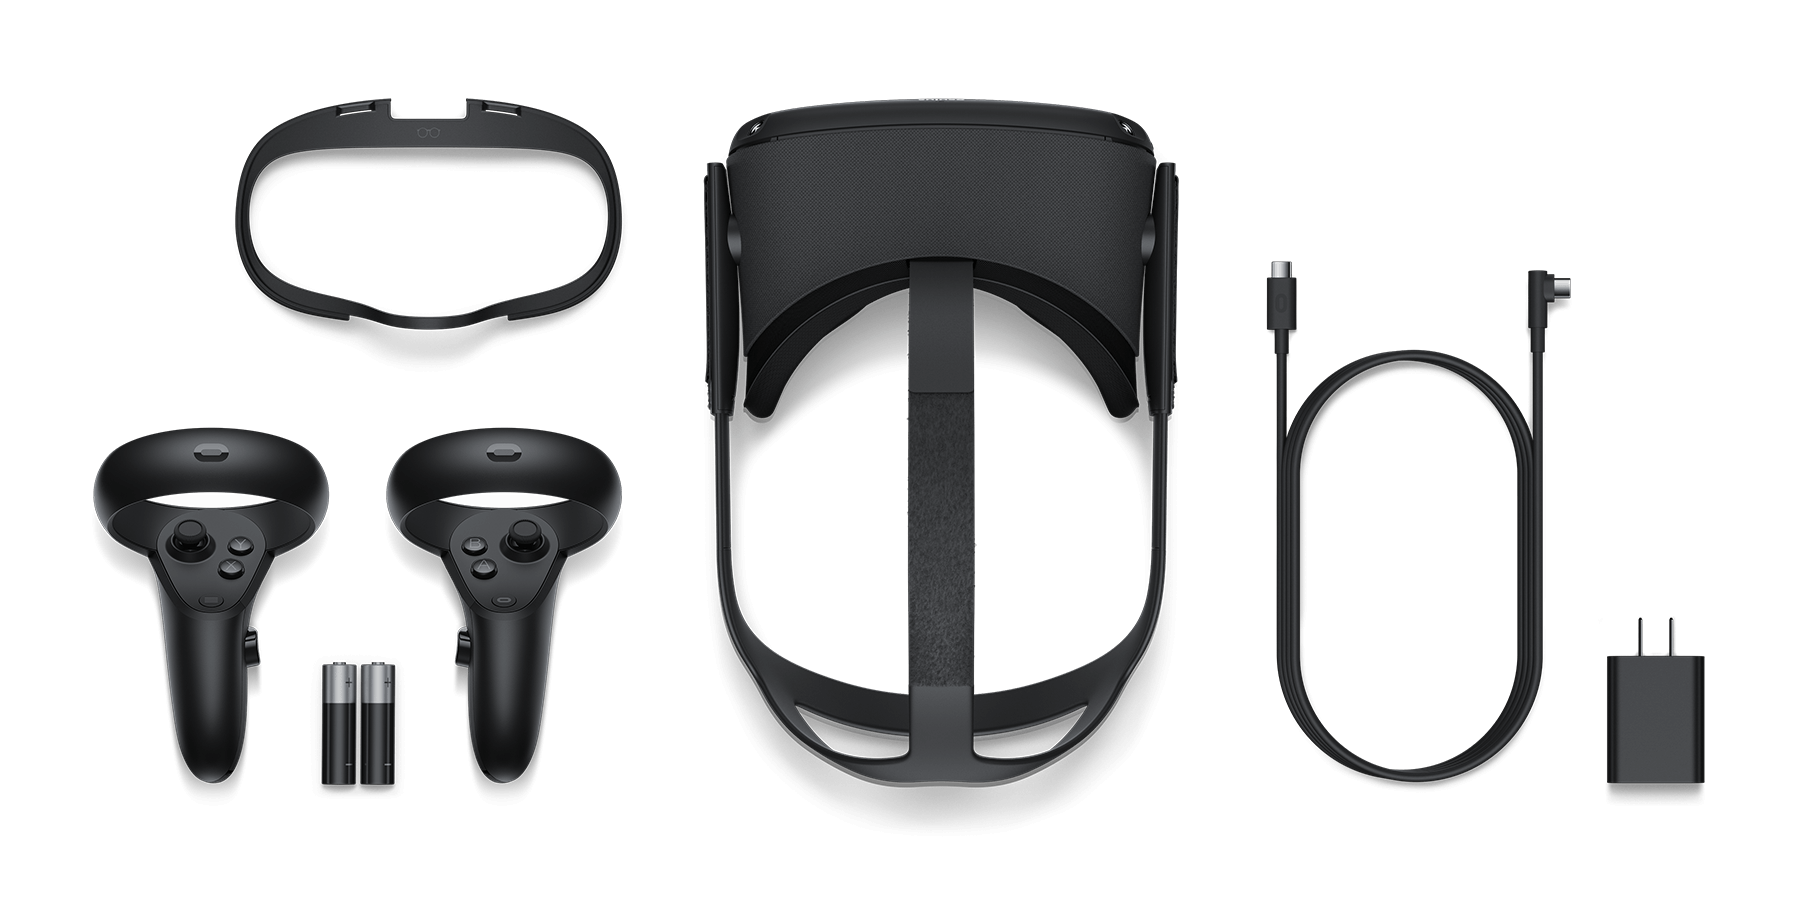 oculus quest and link cable